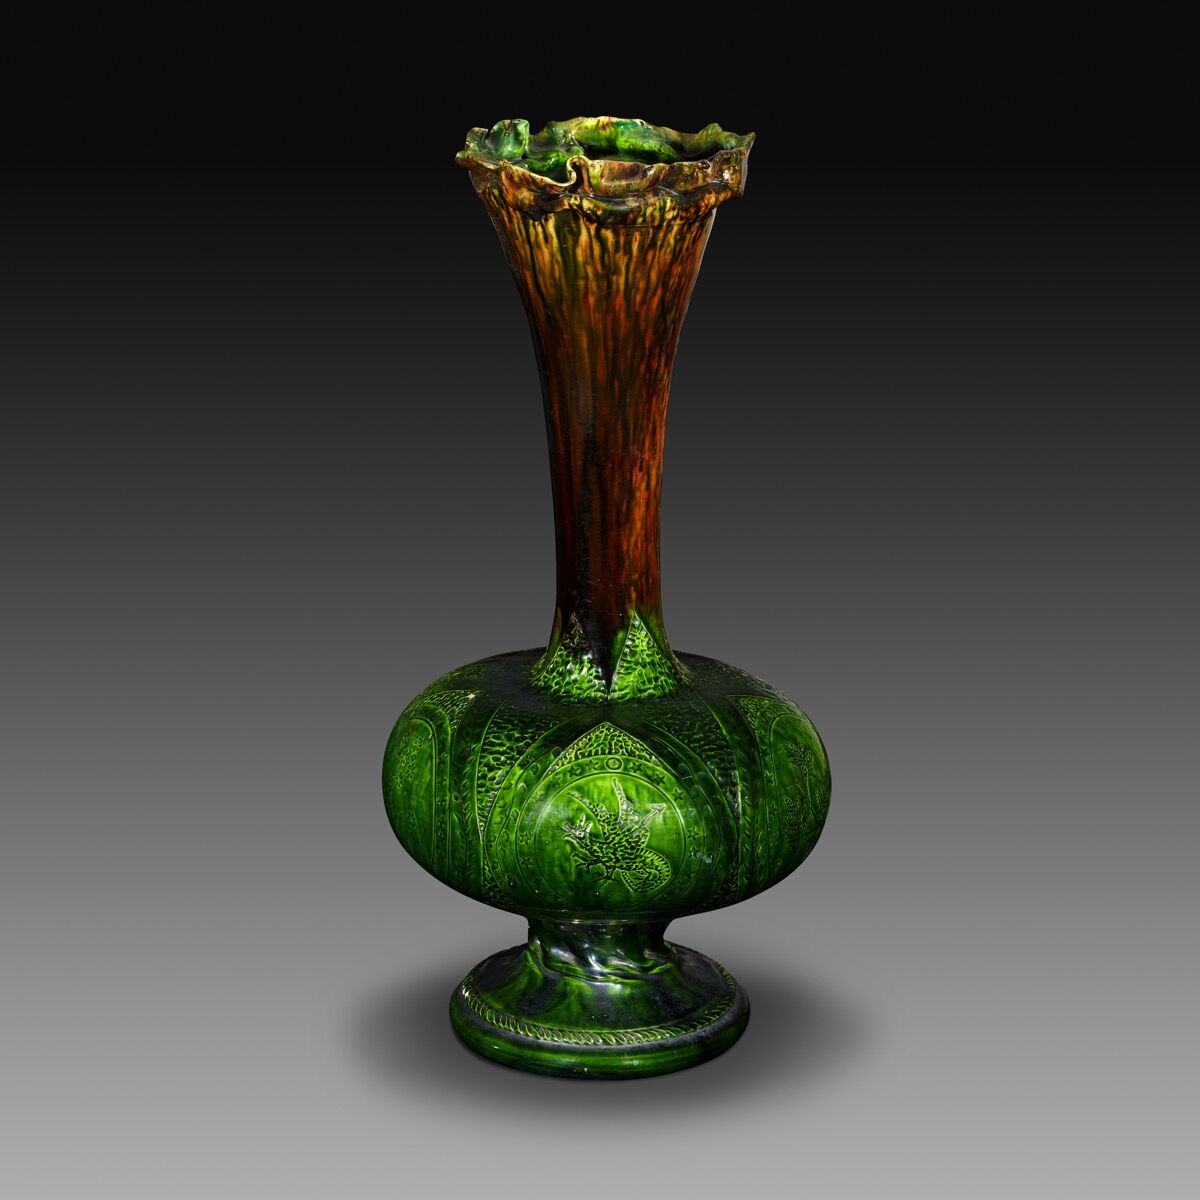 George Ohr, Tall dark green incised vase, 1895–c. 1900. Courtesy of the Collection of Marty and Estelle Shack. Photo by Phillip Ennis.